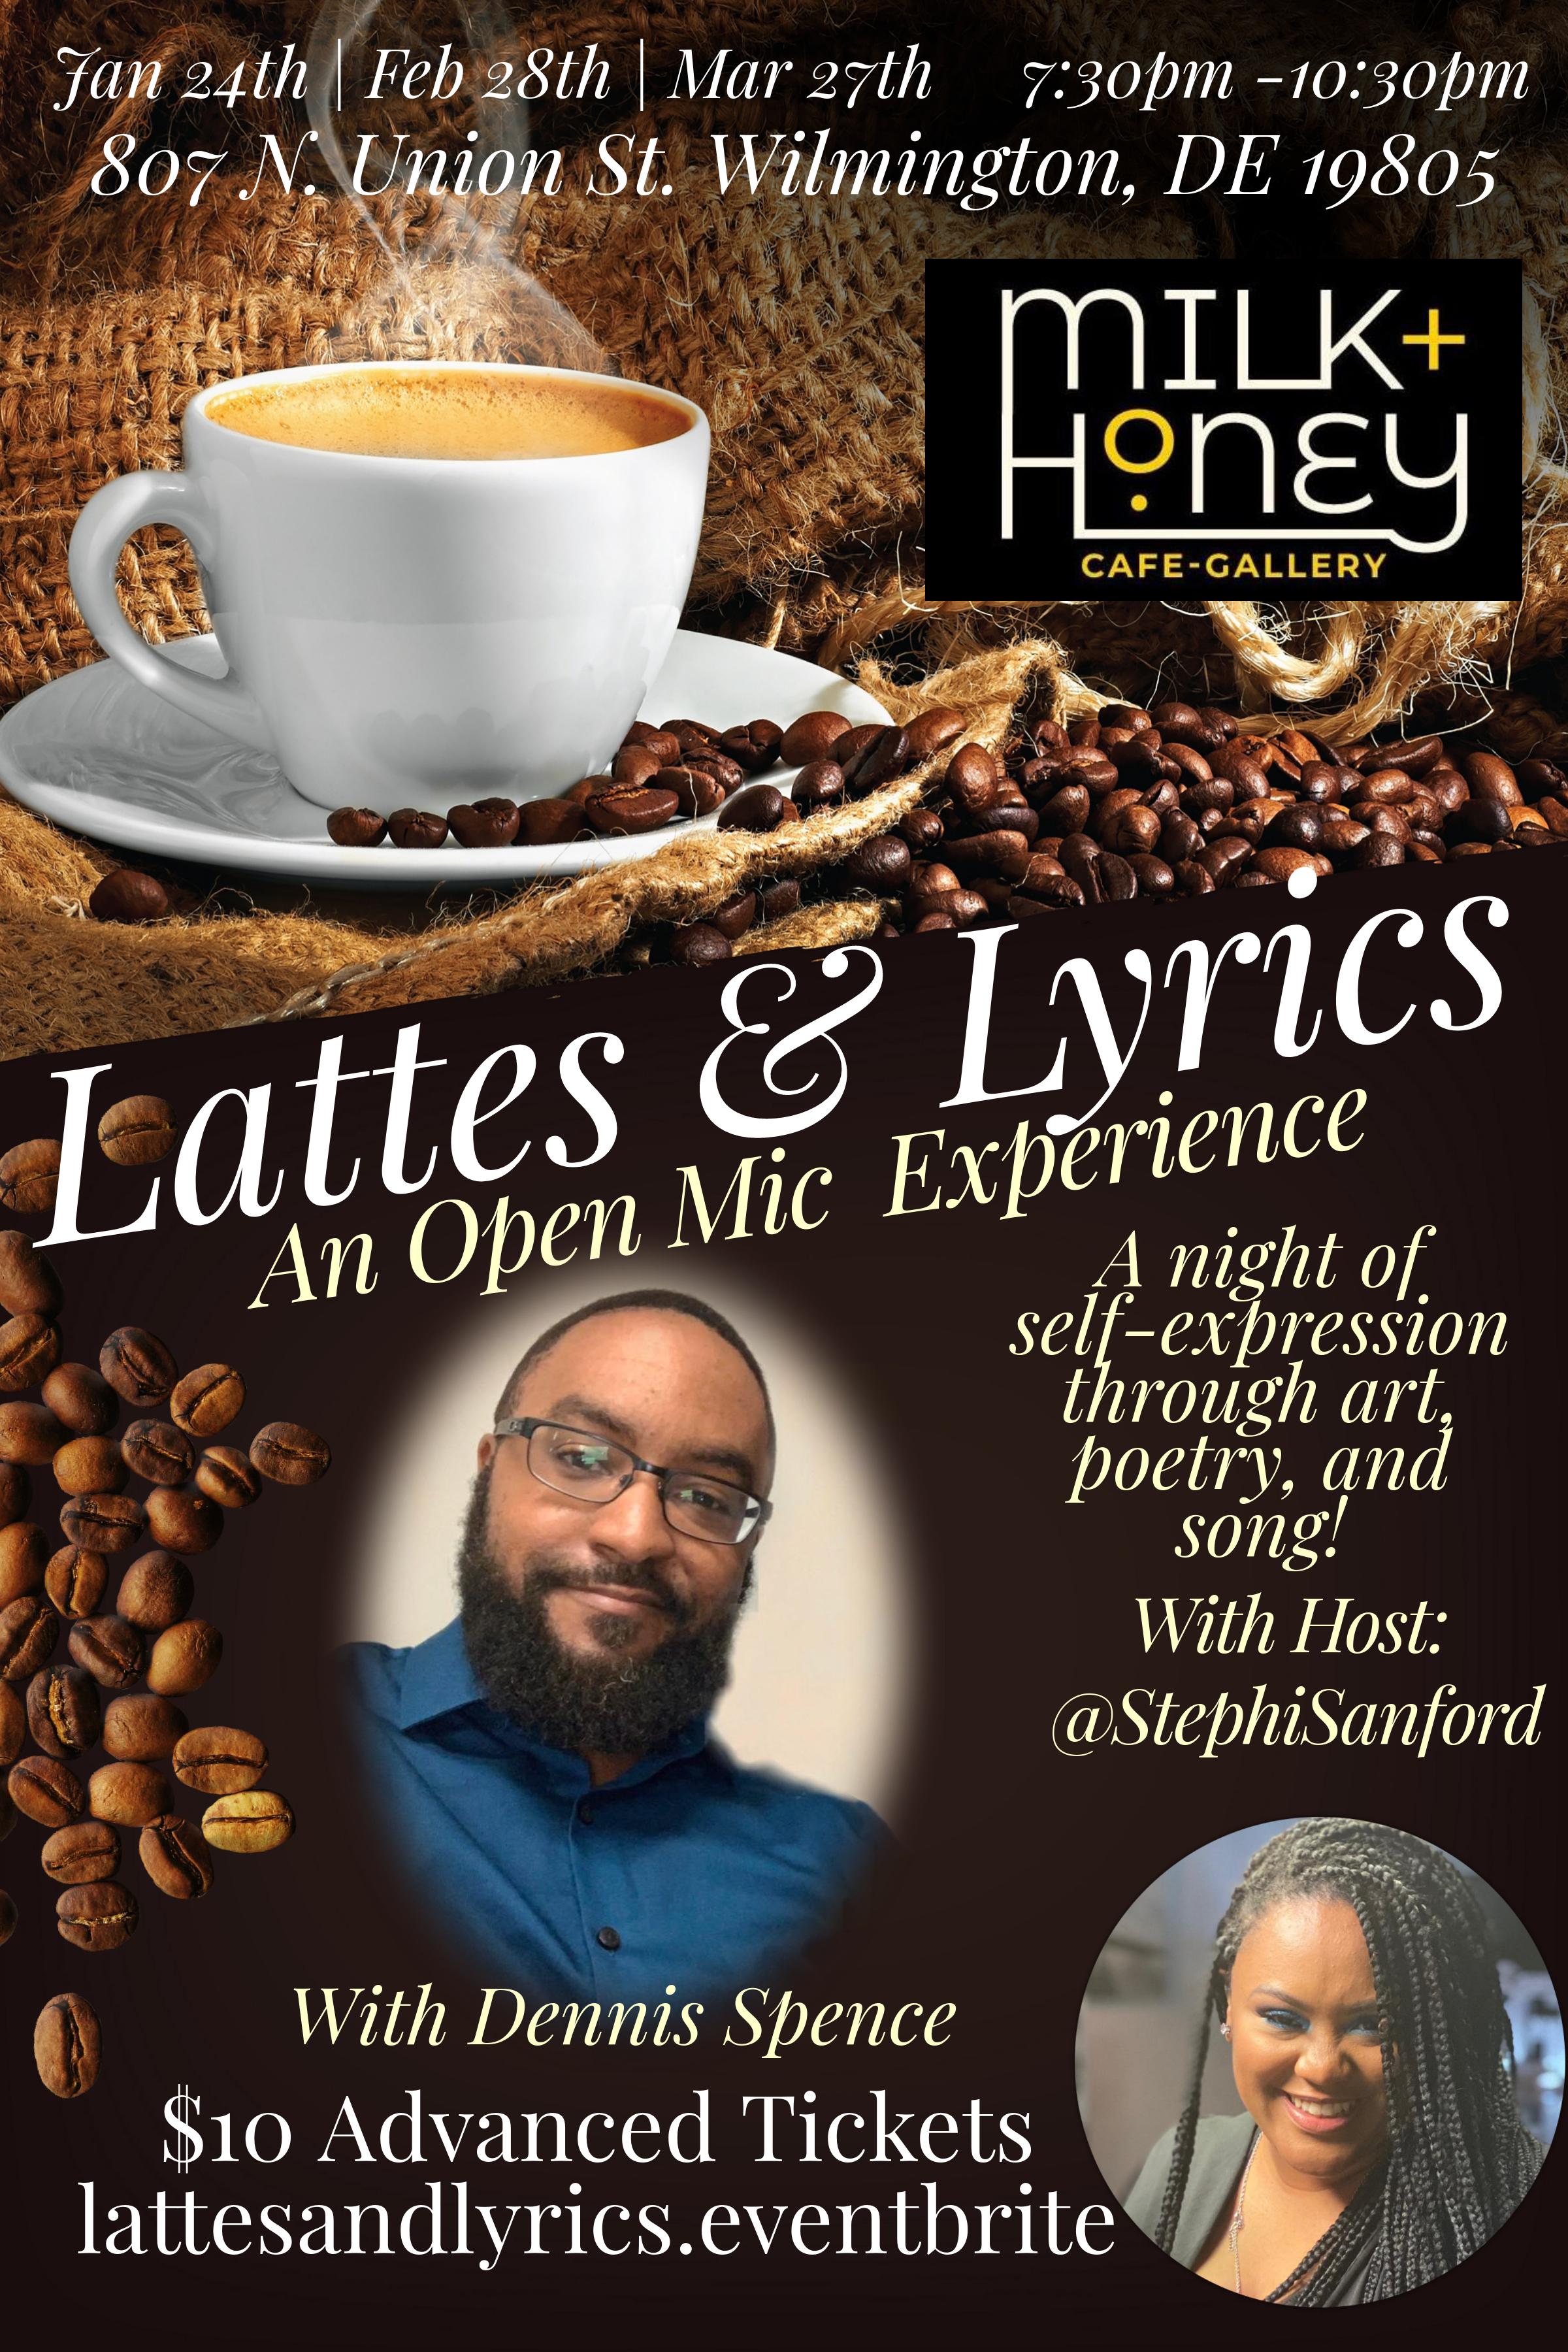 Lattes And Lyrics- An Open Mic Experience